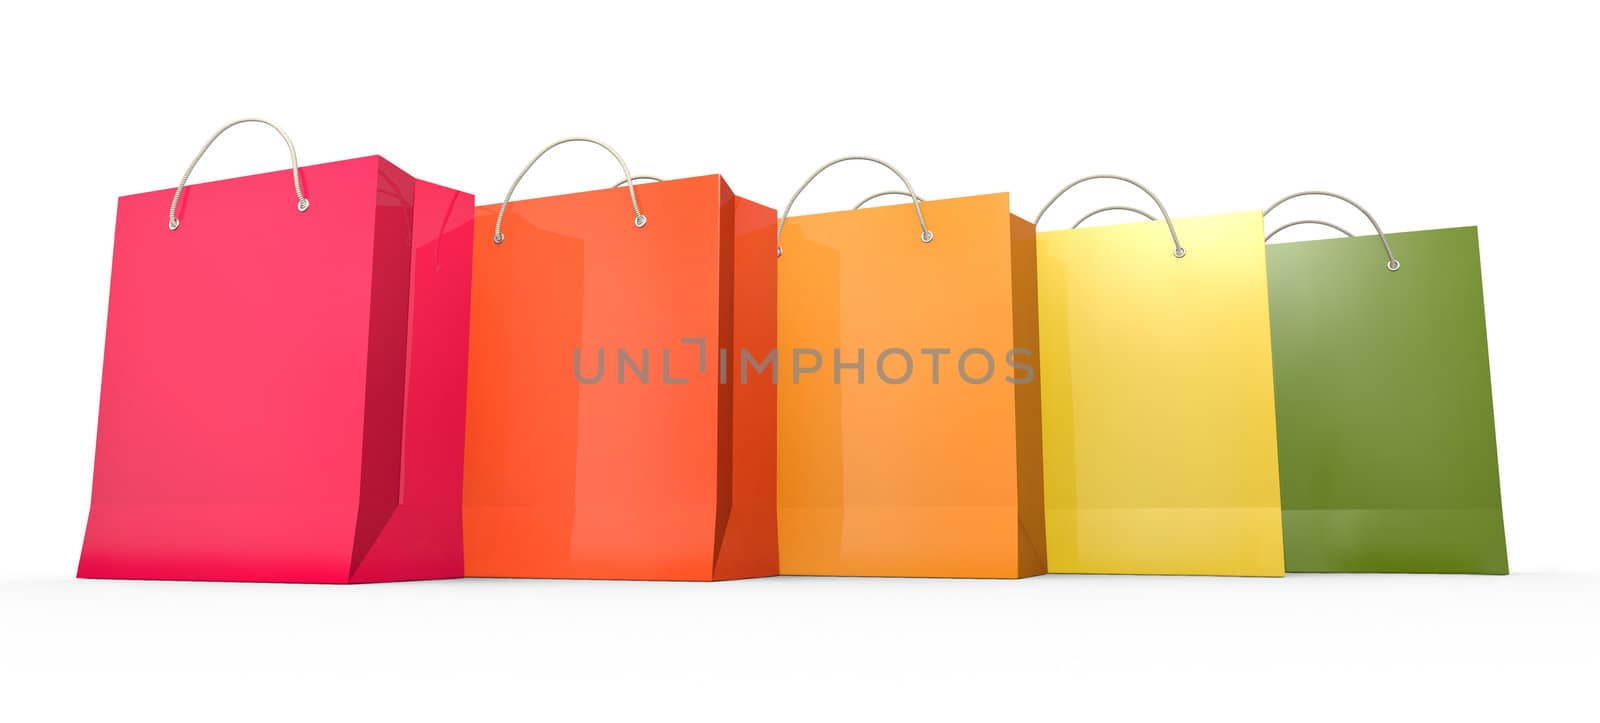 Five colorful shopping bags. 3D rendered illustration.
